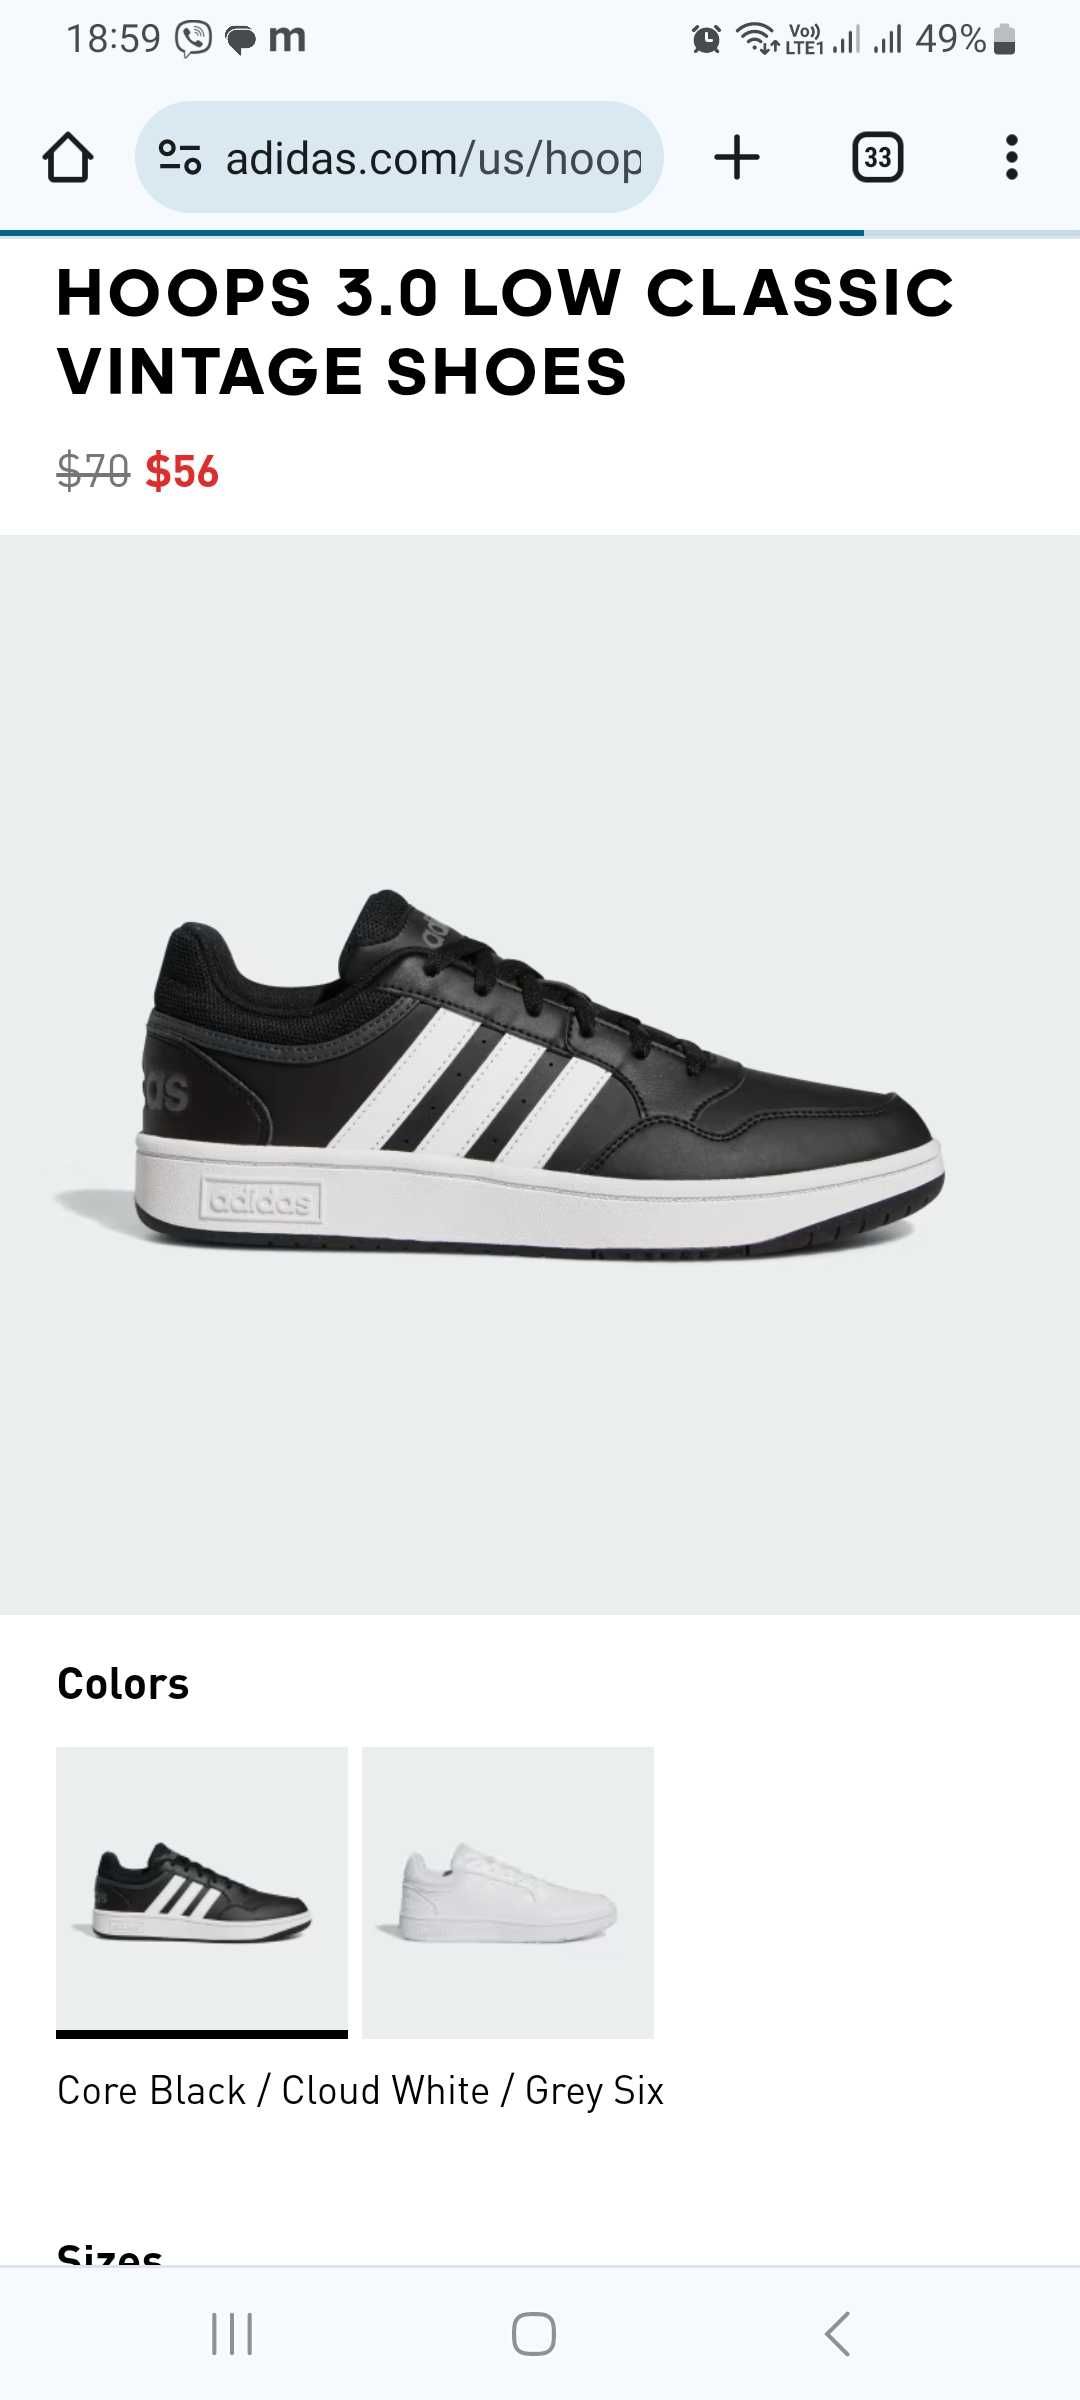 Adidas  Hoops 3.0 Low Classic Vintage shoes